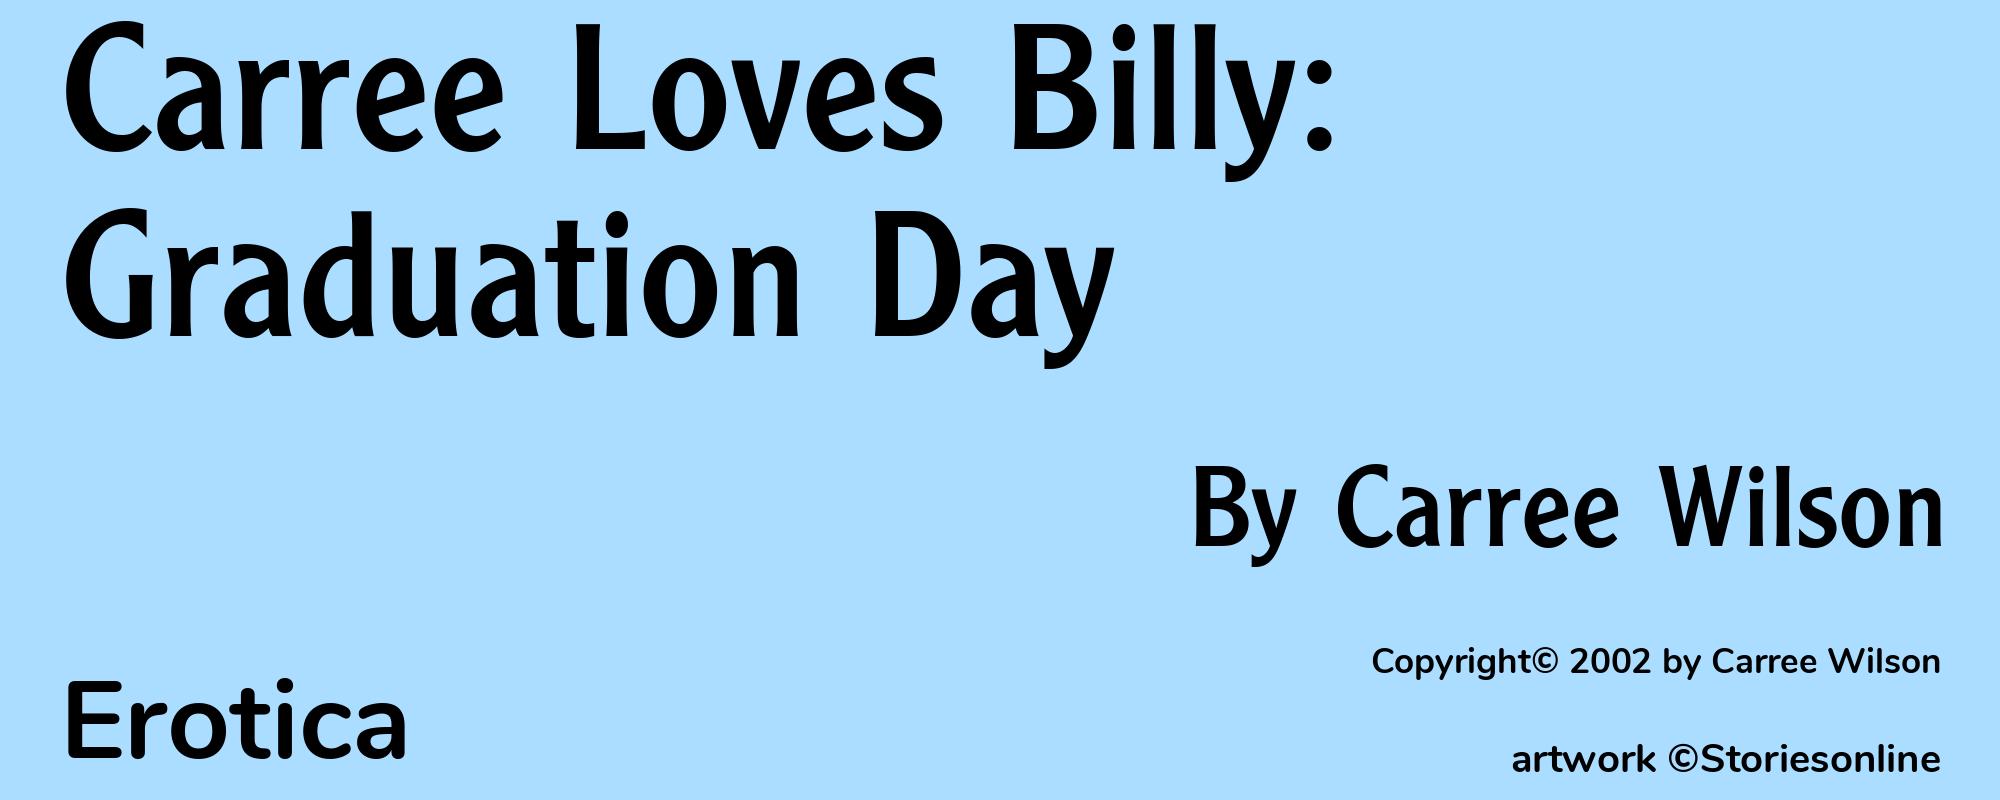 Carree Loves Billy: Graduation Day - Cover